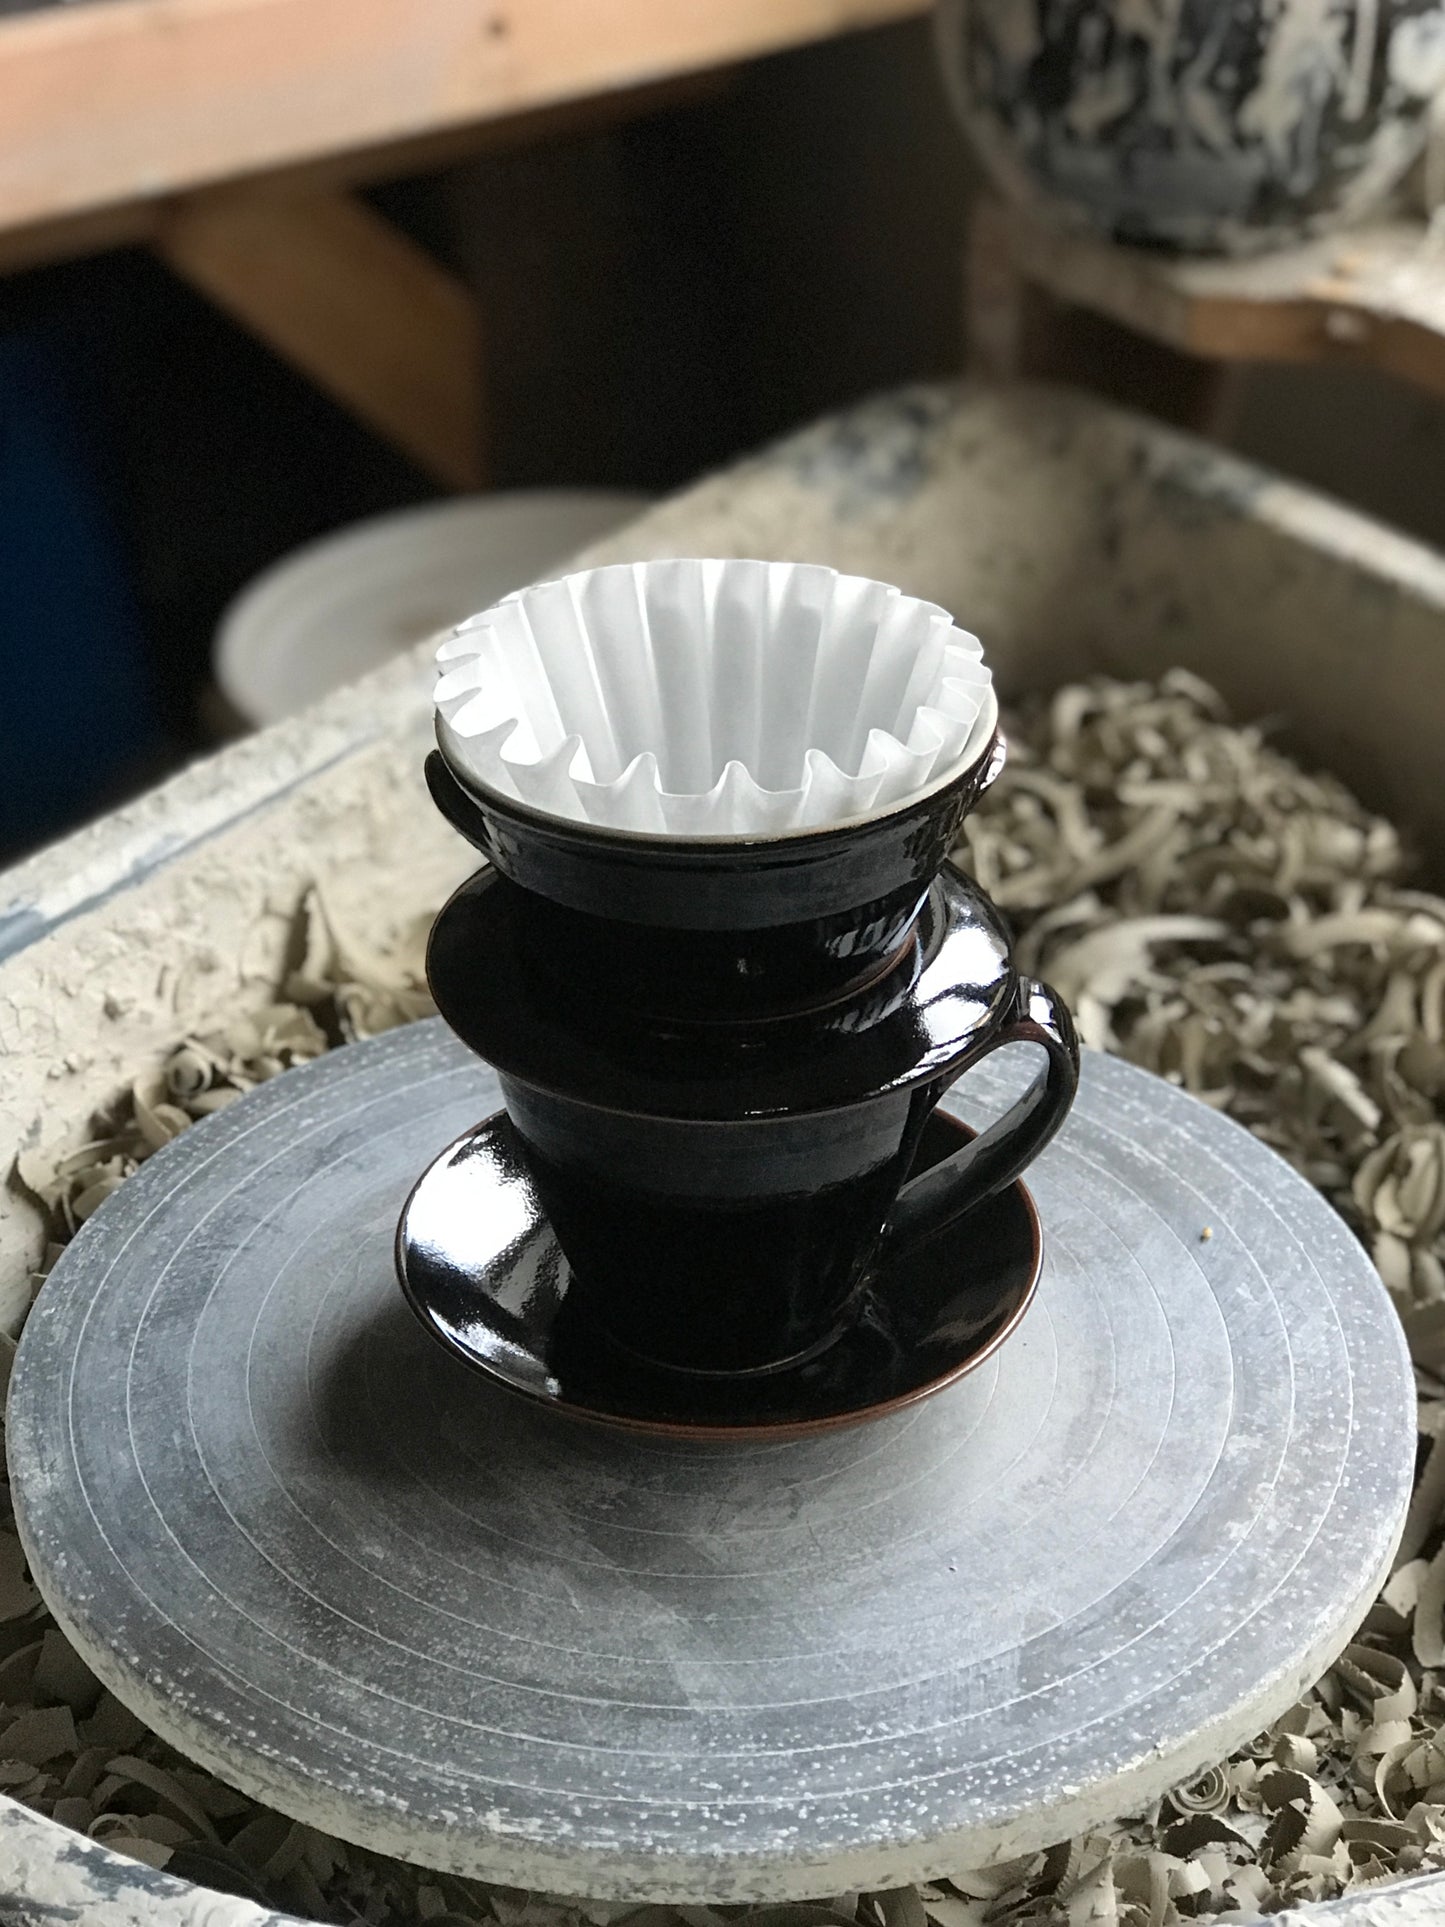 Pour-over filter coffee set